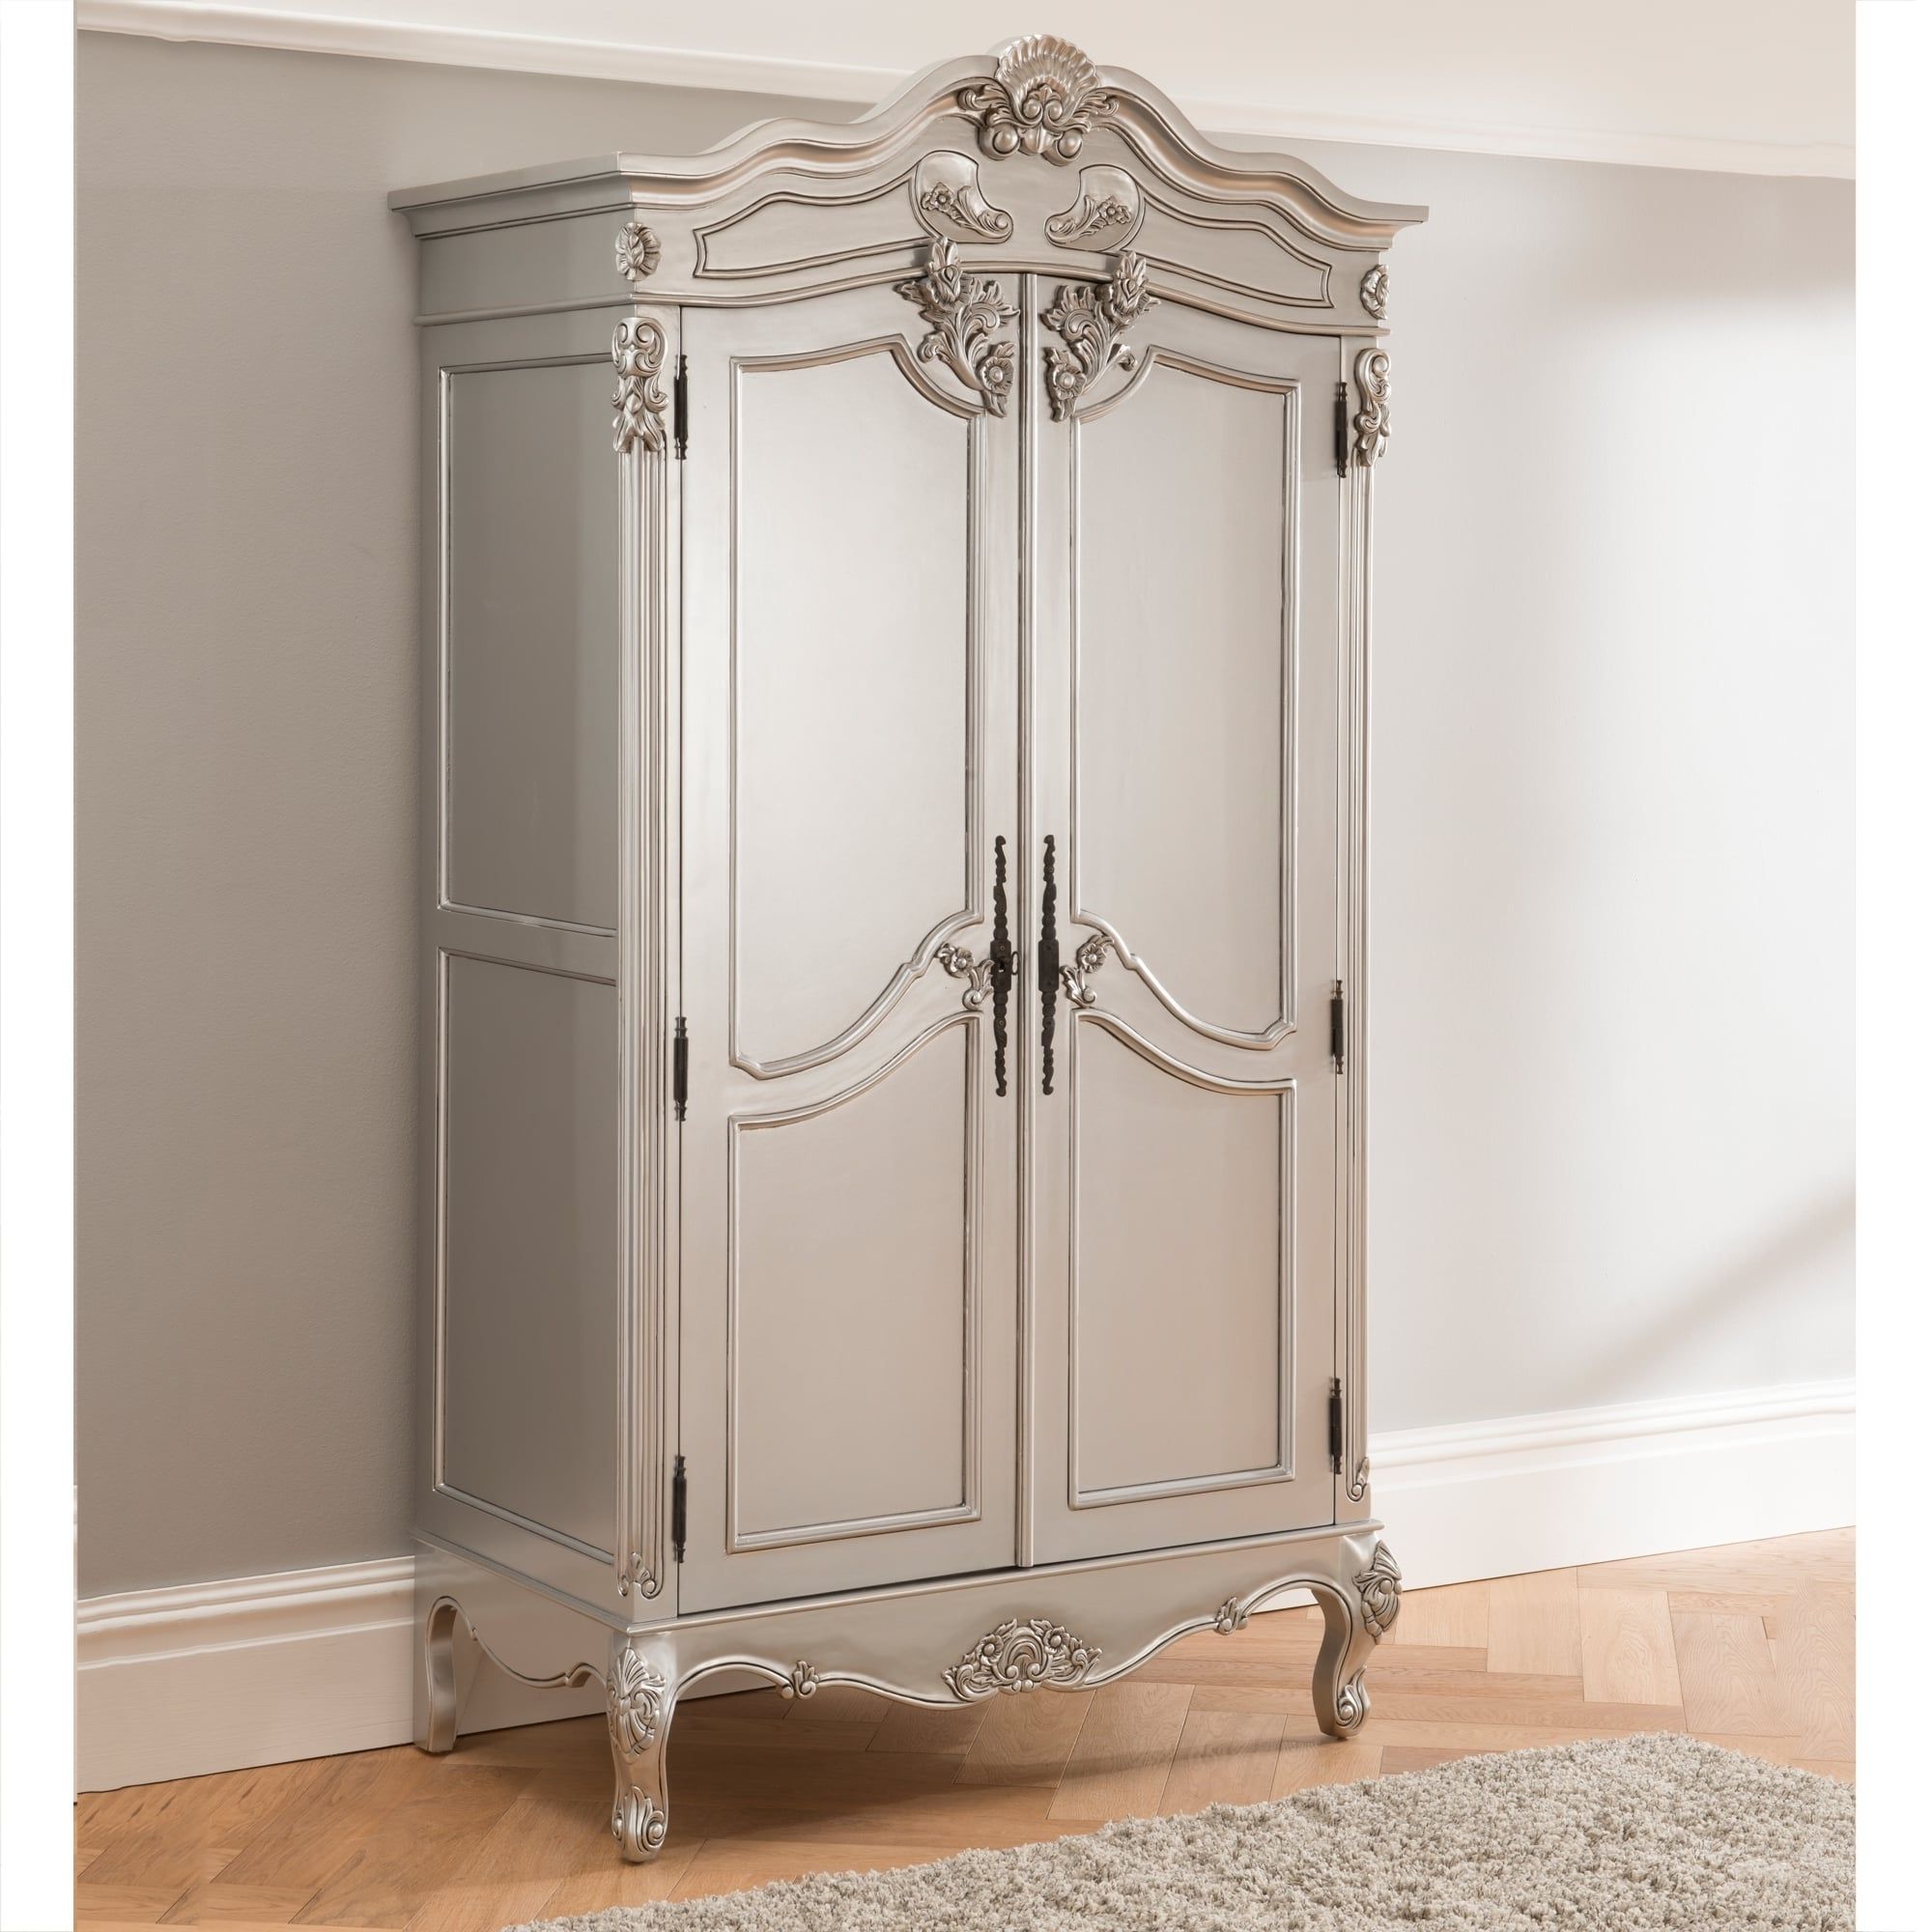 Newest Baroque Antique French Wardrobe Works Exceptional Alongside Our With Regard To Baroque Wardrobes (View 1 of 15)